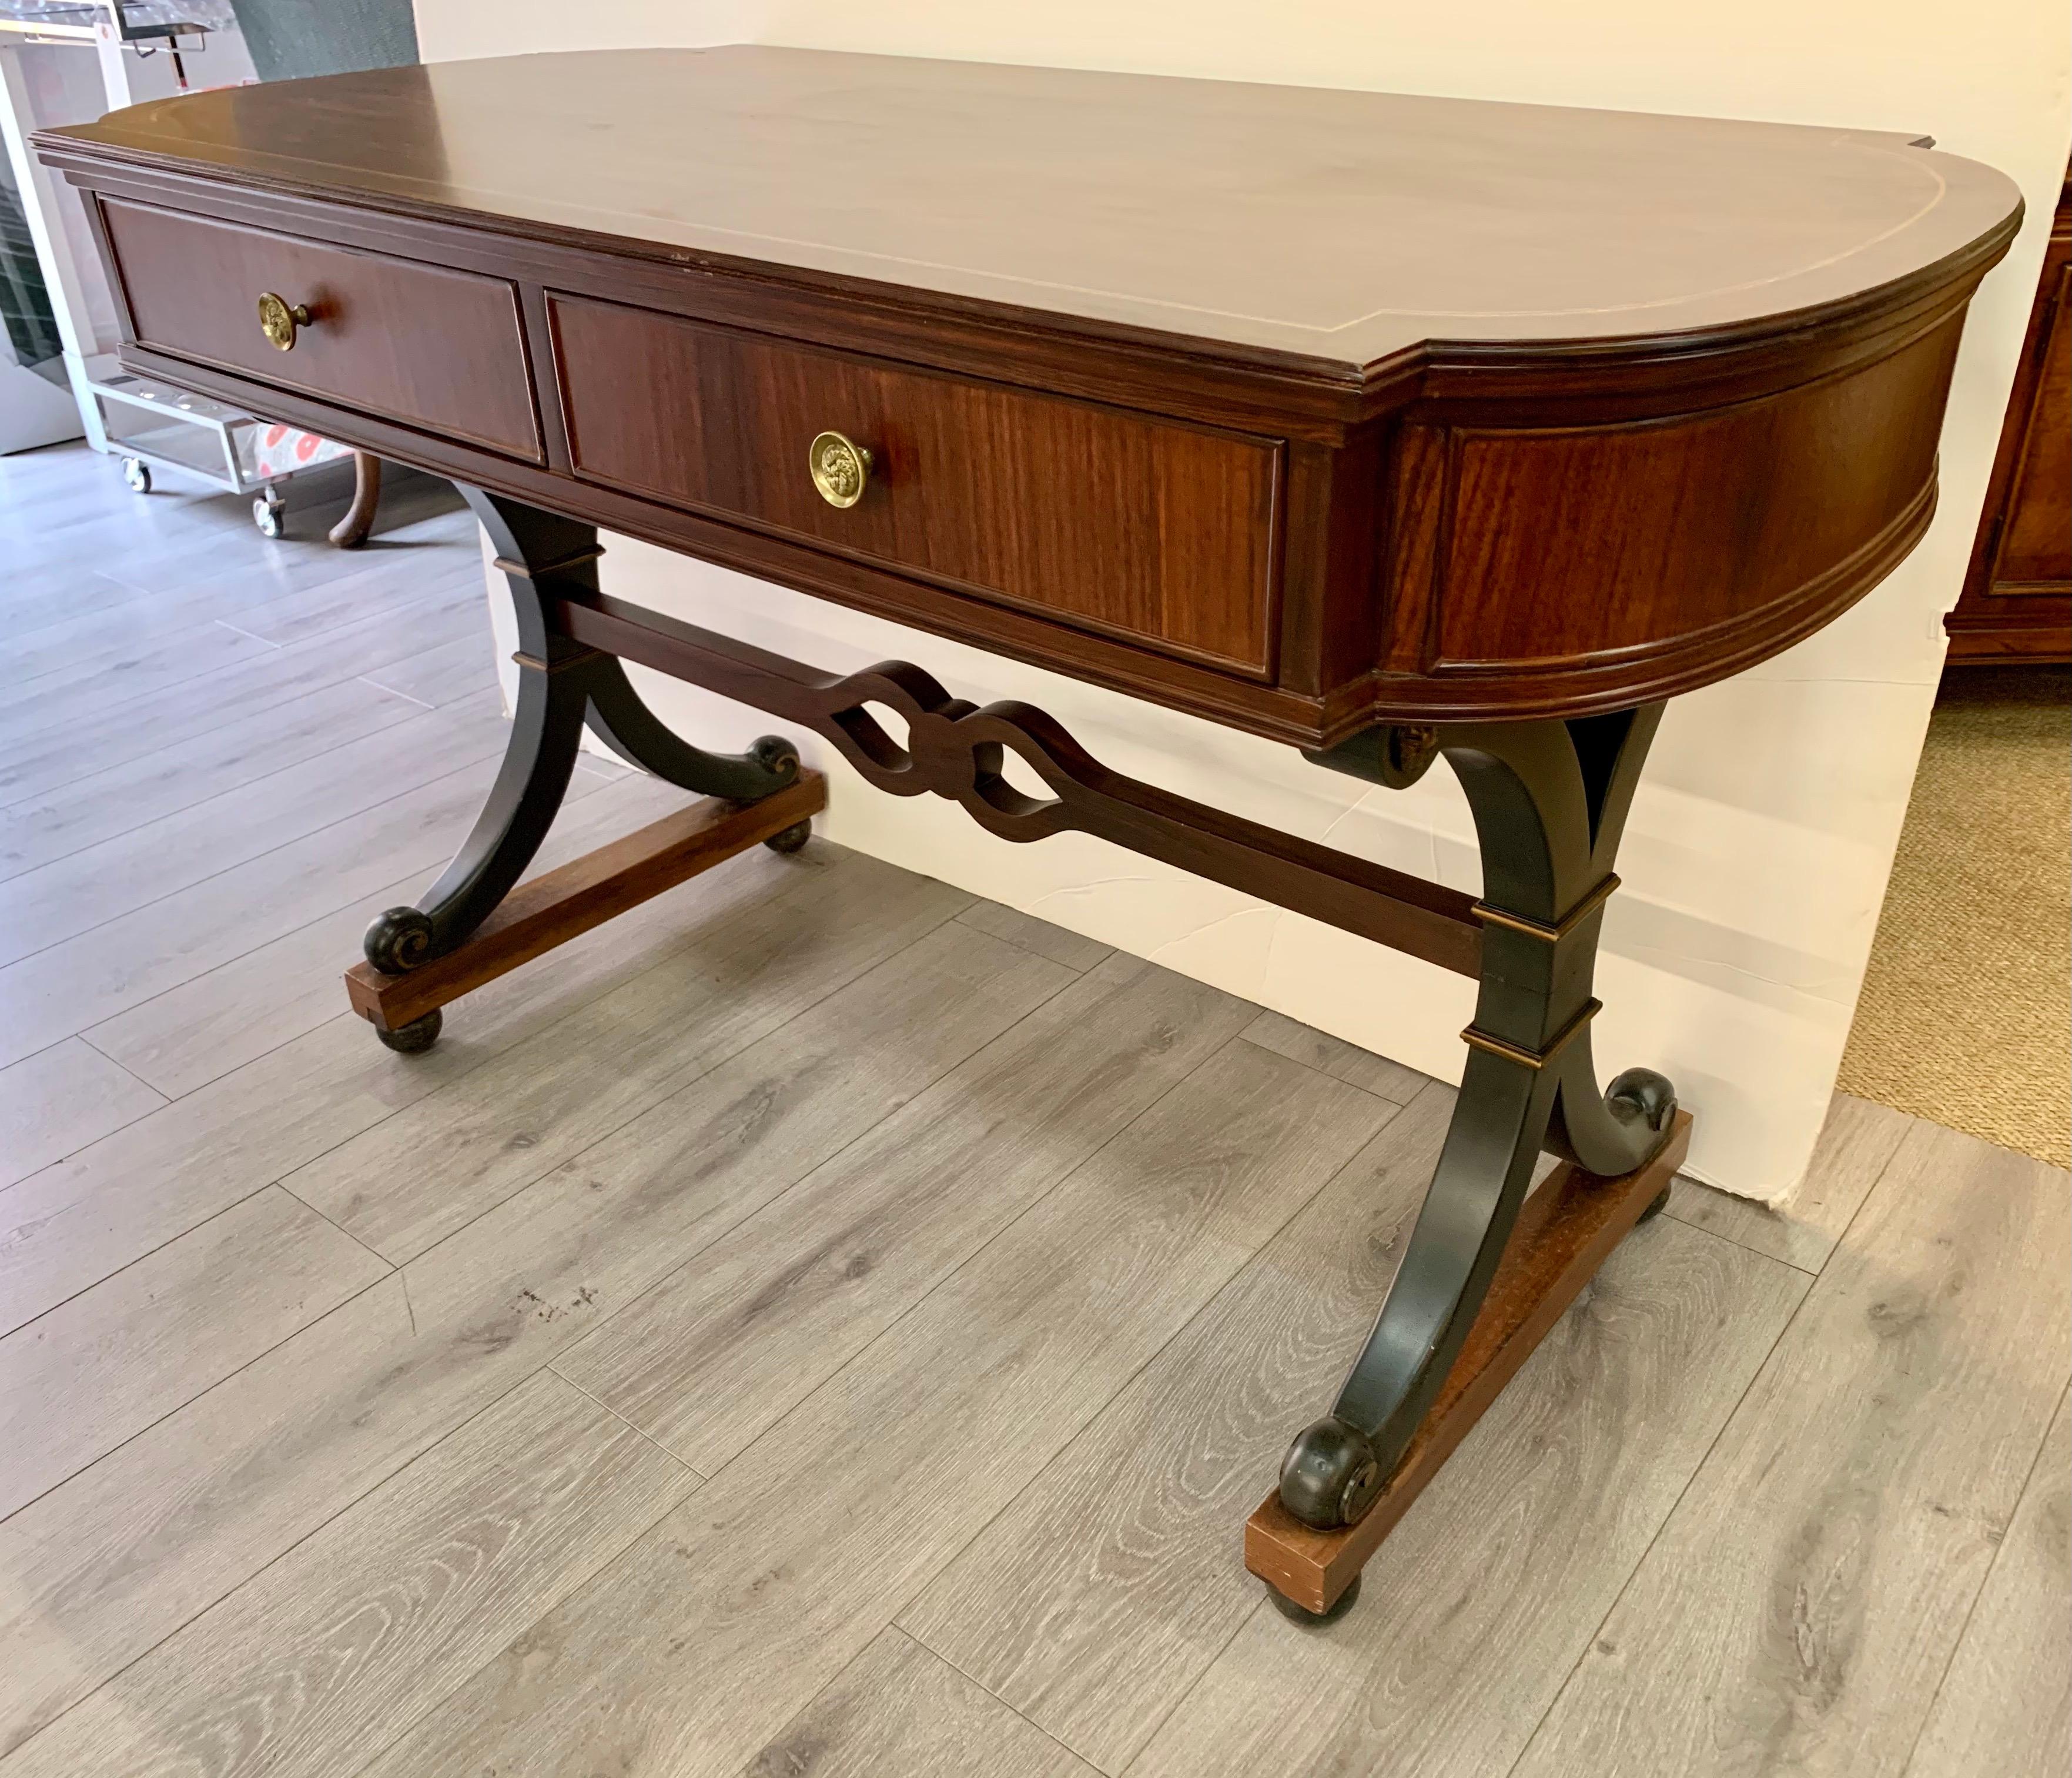 Handsome regency style mahogany desk or sofa table with line inlay on the top. It has two front drawers. Brass pulls on front and on the two faux drawers in back. It rests on black splayed legs with gold detail and carved stretcher. It is finished